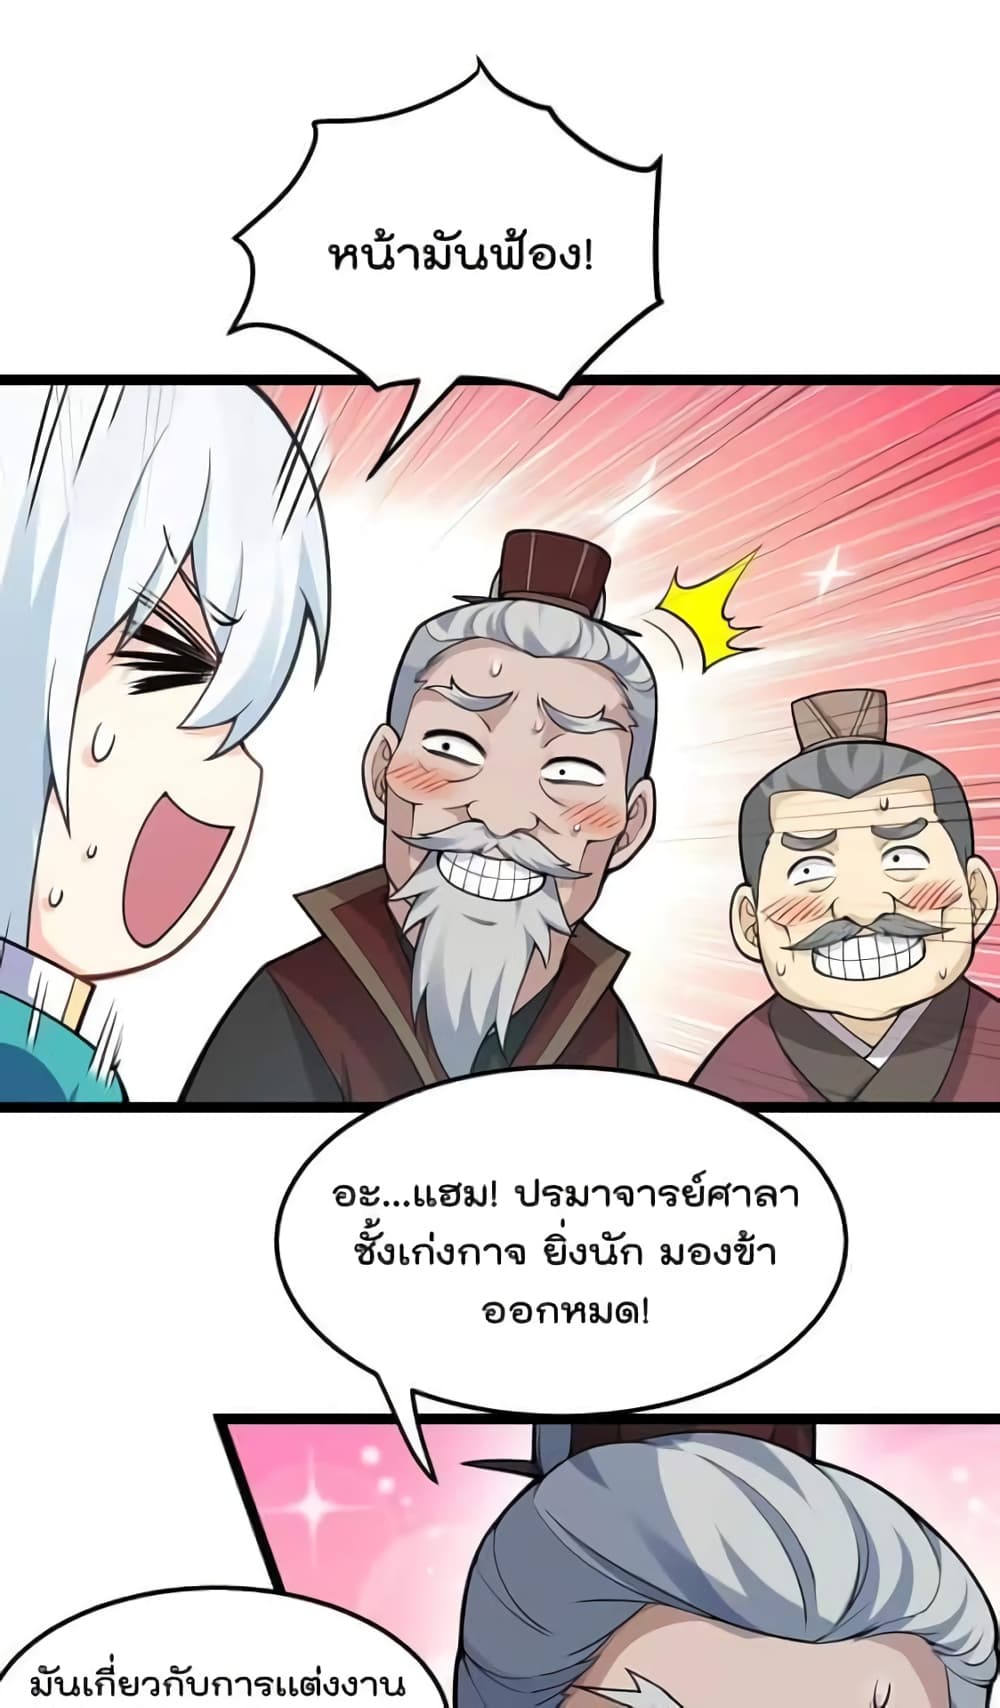 Godsian Masian from Another World ตอนที่ 98 (11)